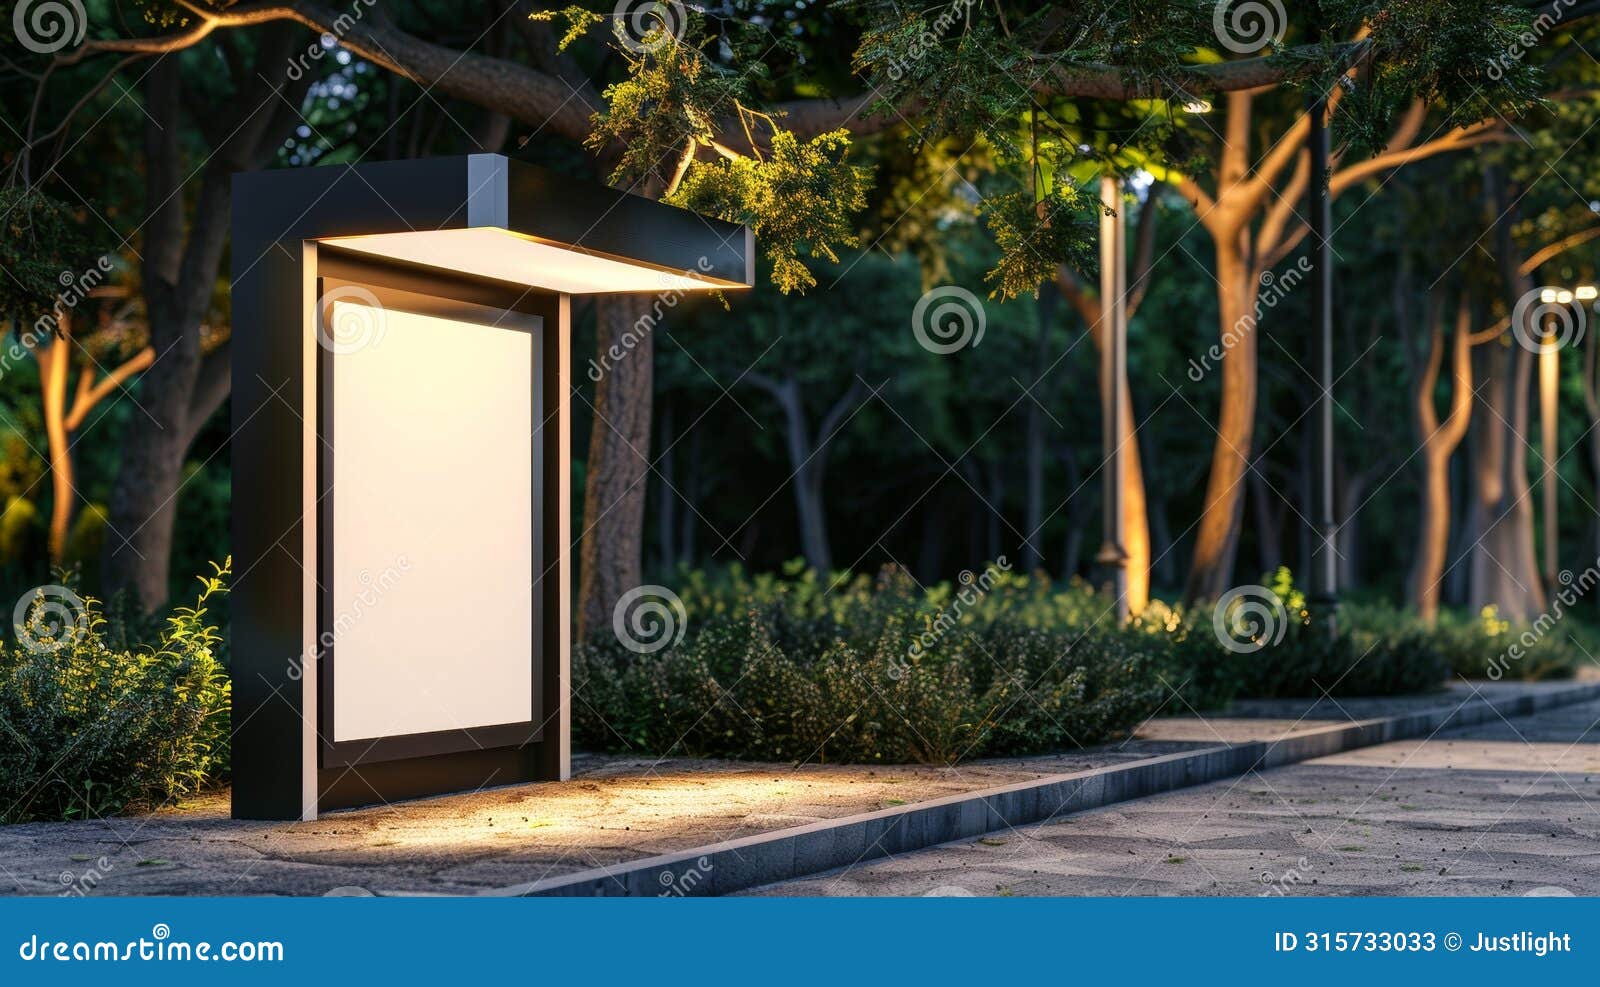 blank mockup of a customizable outdoor kiosk with interchangeable panels for different events or locations